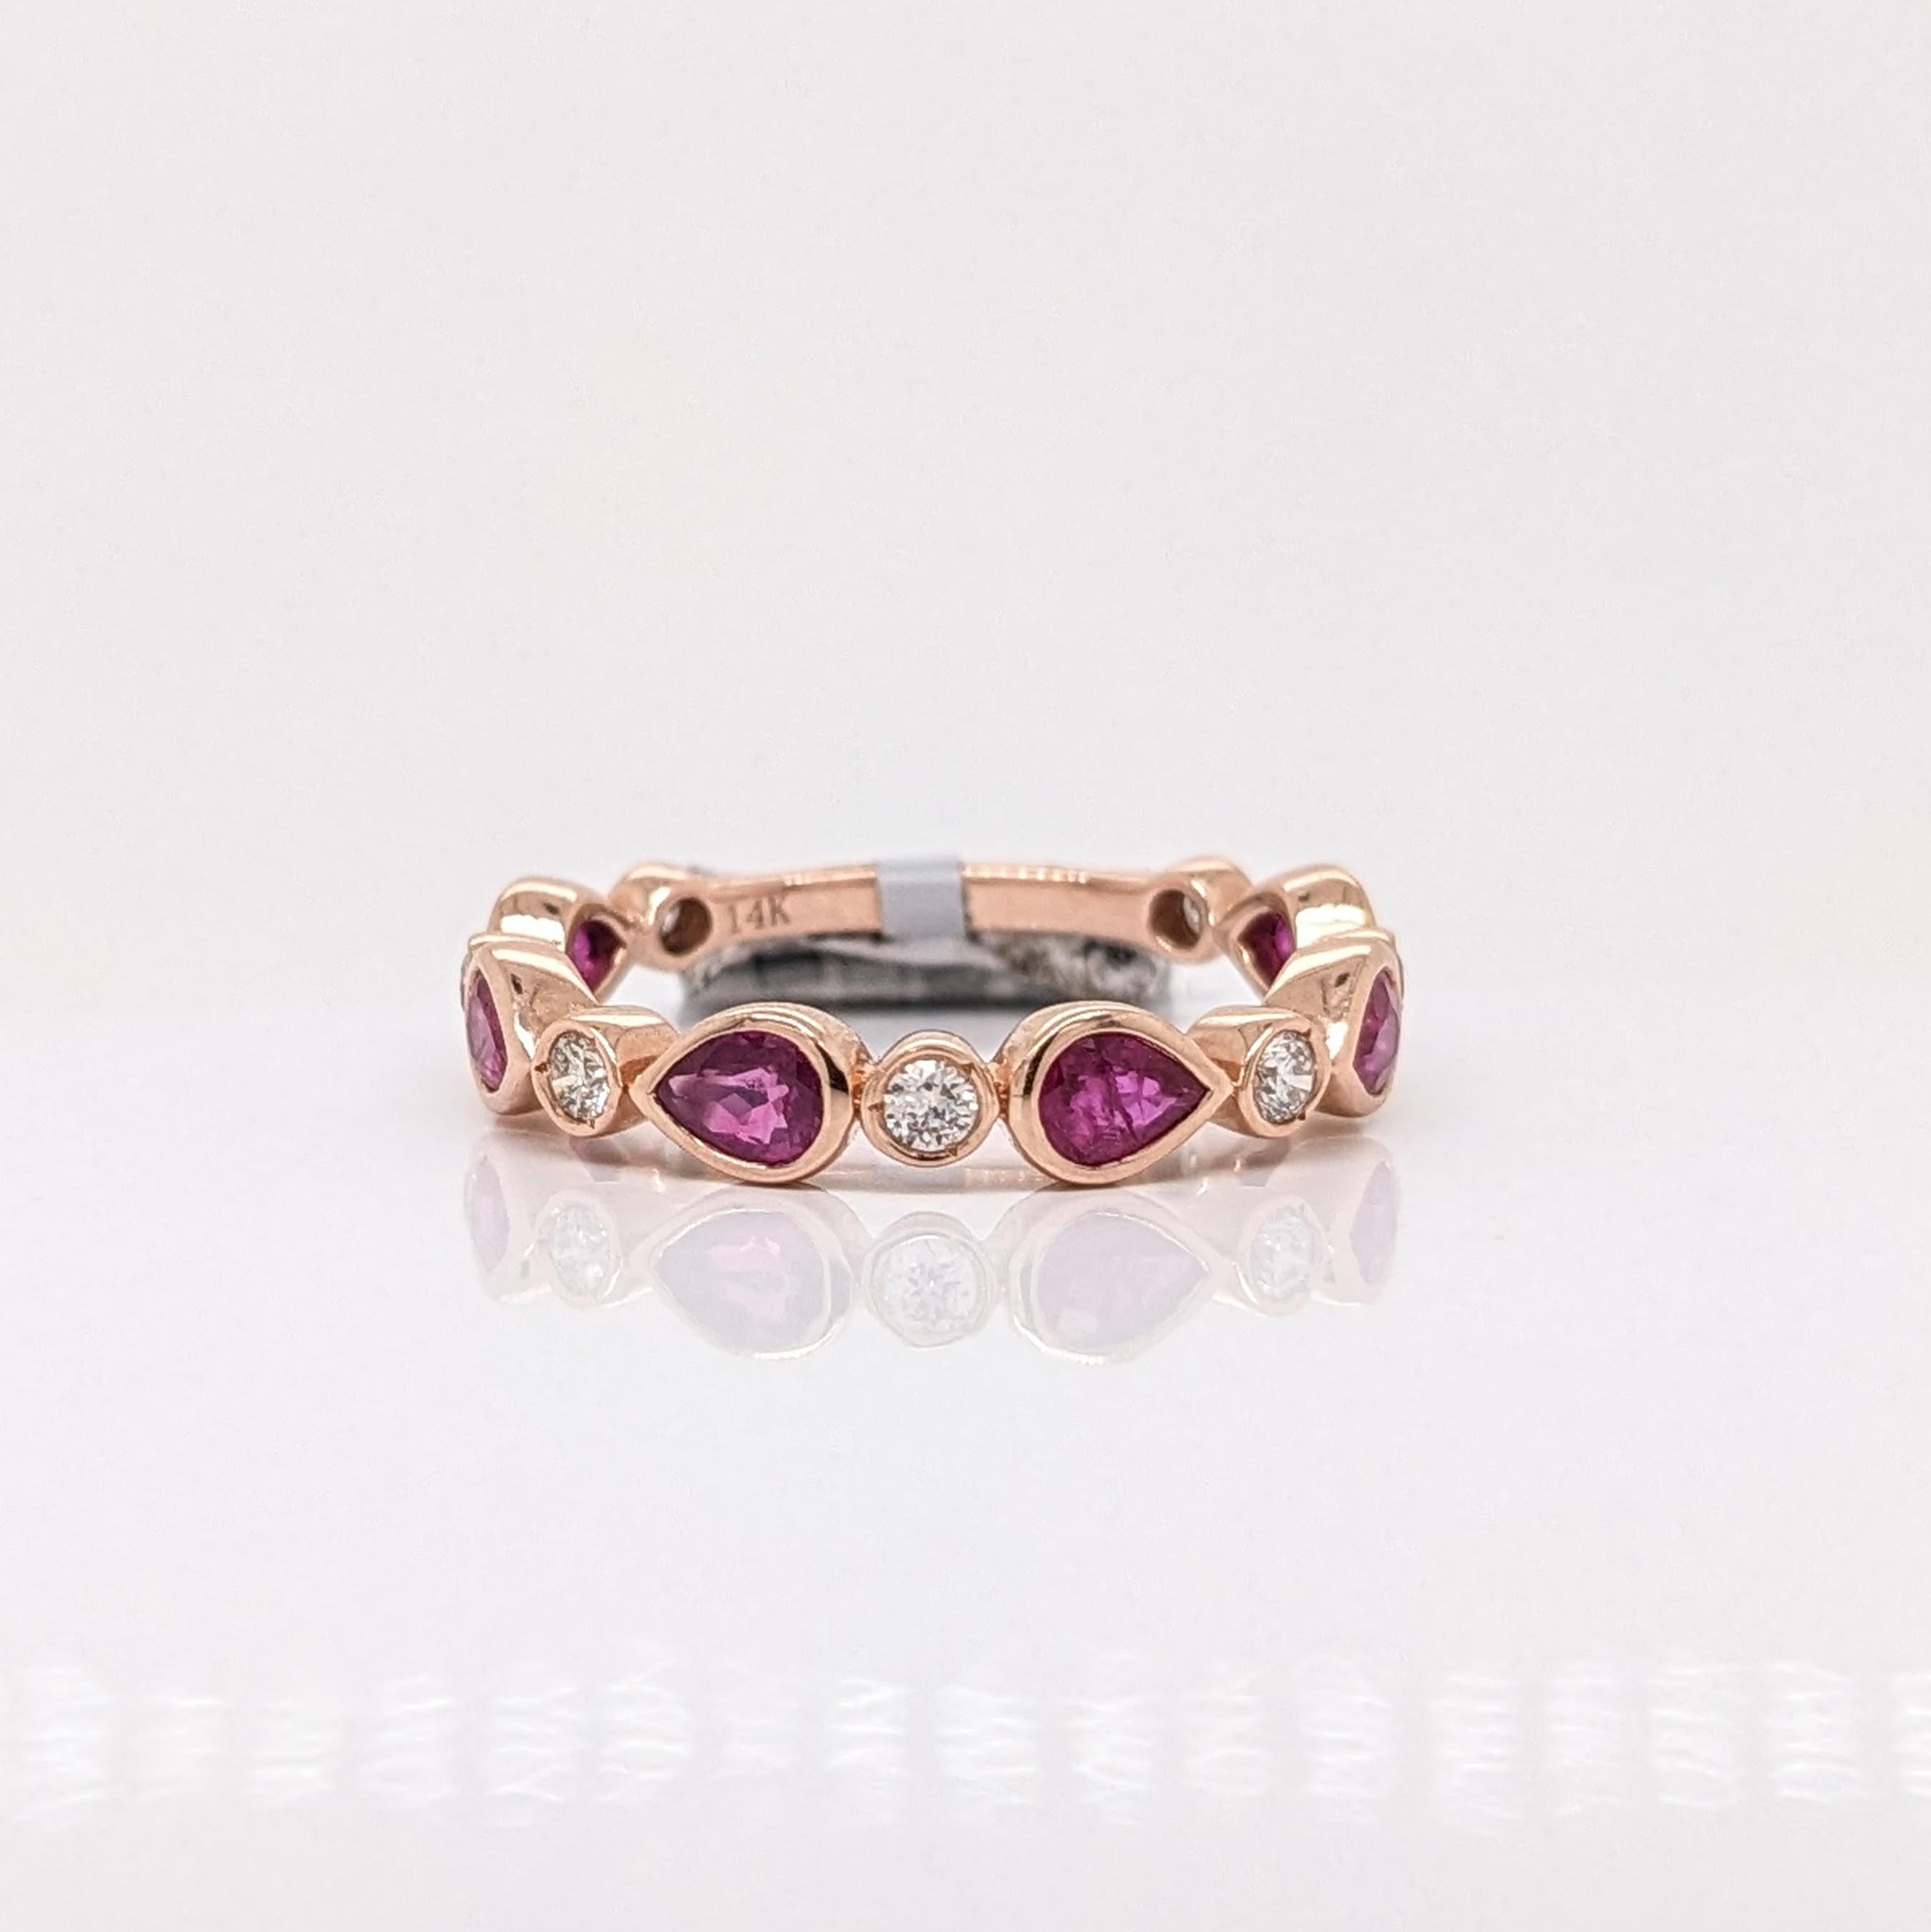 This exquisite 14K rose gold band ring is bezel set with red rubies and sparkling natural diamonds for a stunning look. A versatile piece of jewelry for any occasion.

Specifications

Item Type: Ring
Centre Stone: Ruby
Treatment: